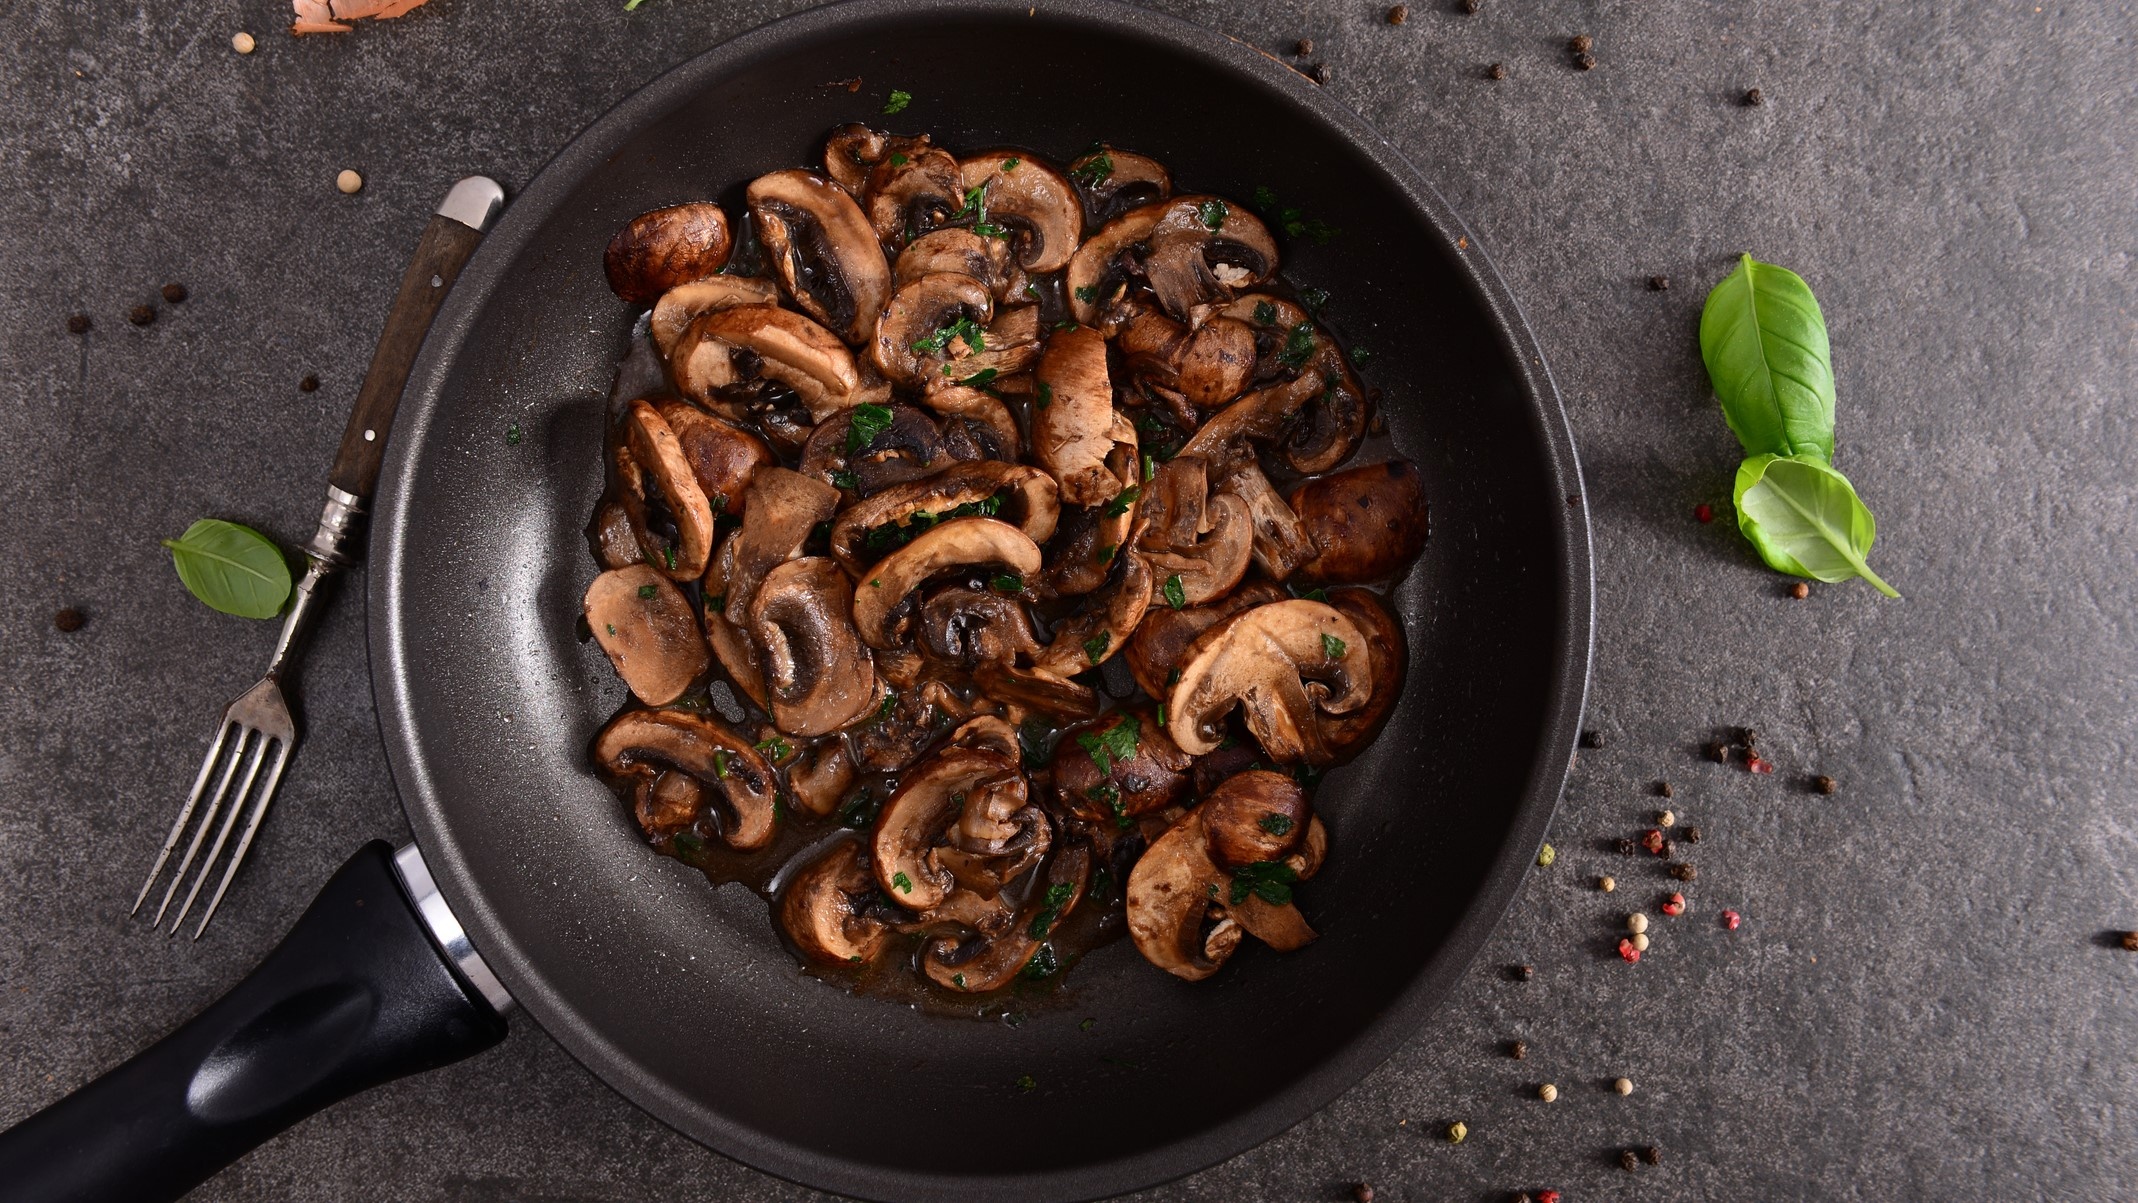 Mushrooms with herb chili sauce, Eat Club's specialty, Fiery and flavorful, Perfect side dish, 2140x1210 HD Desktop